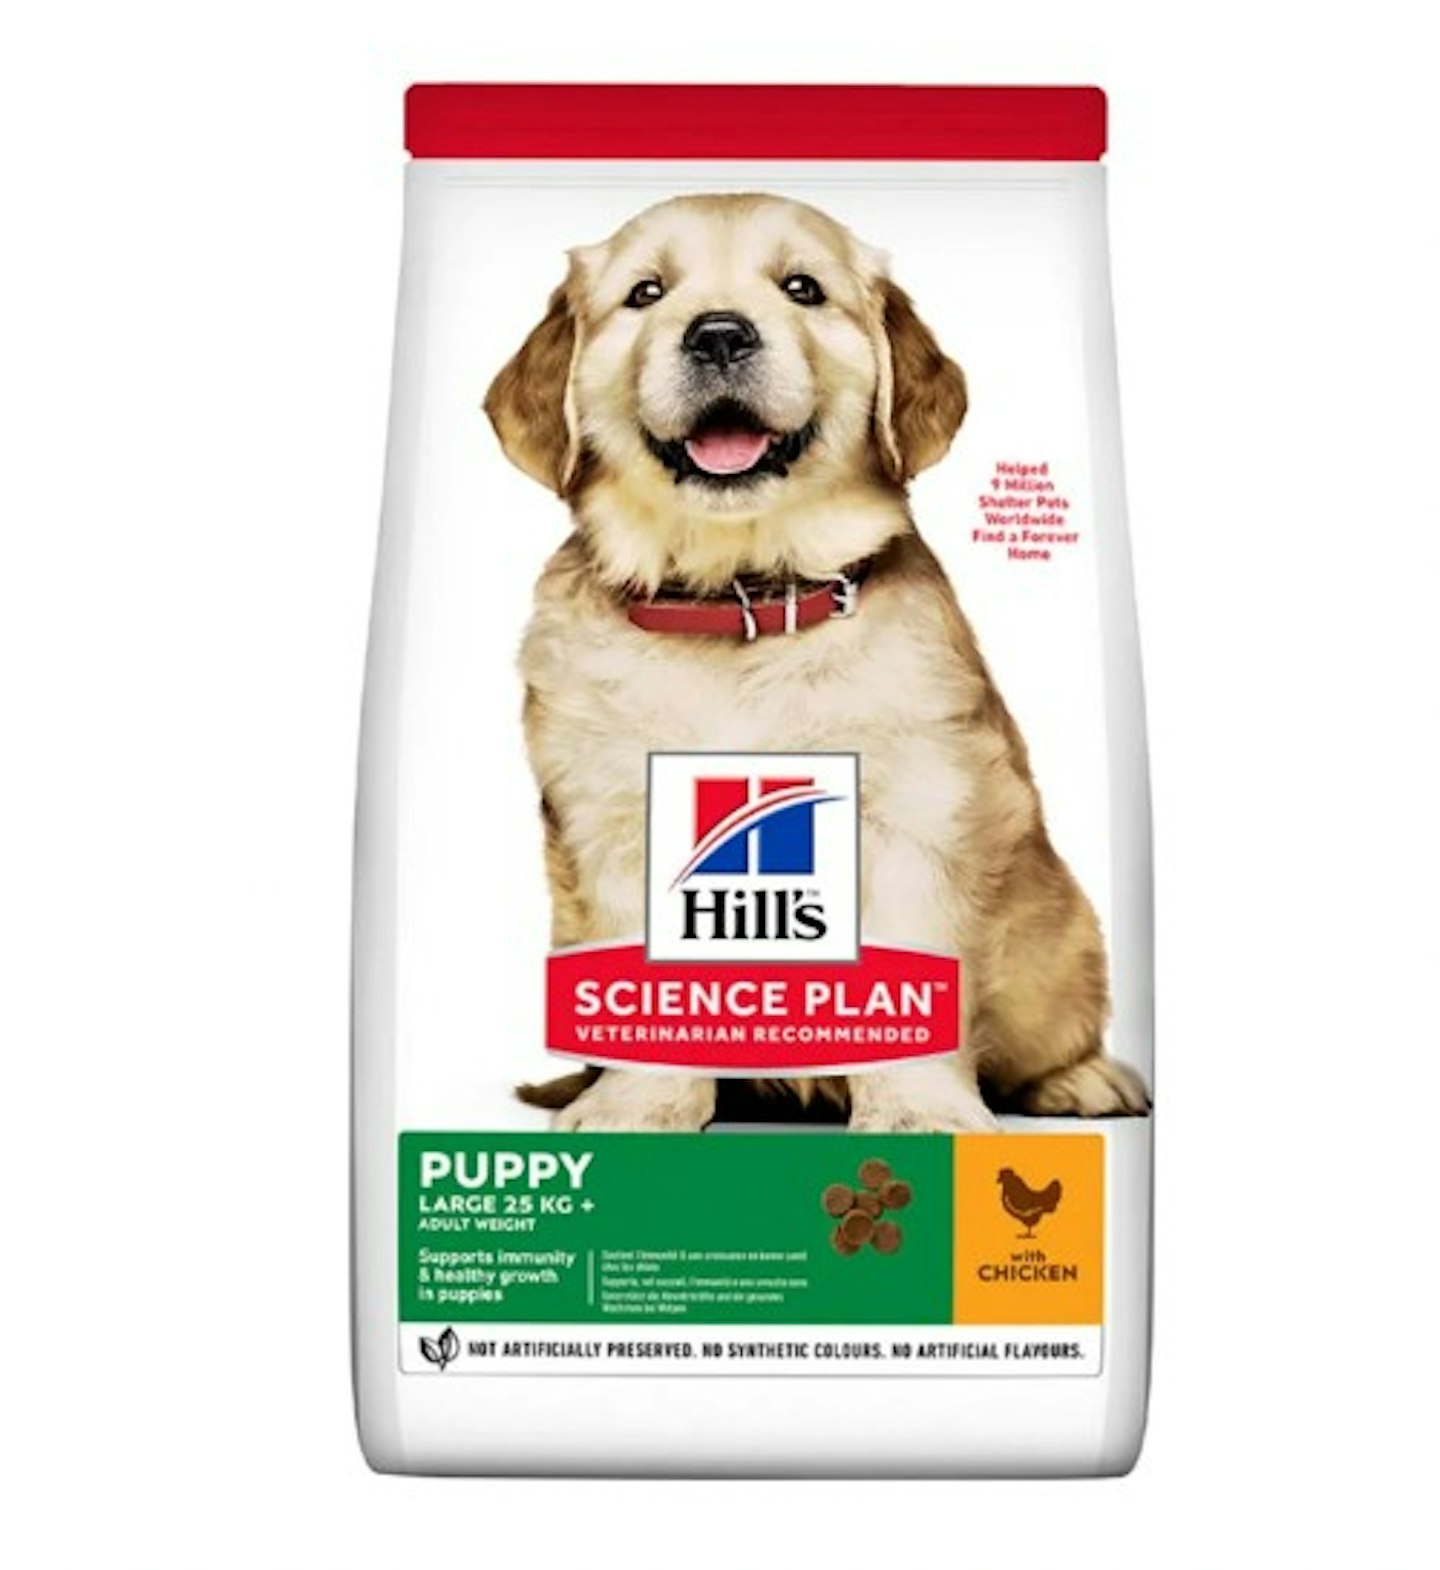 Hill's Science Plan Large Puppy Dry Dog Food - Chicken